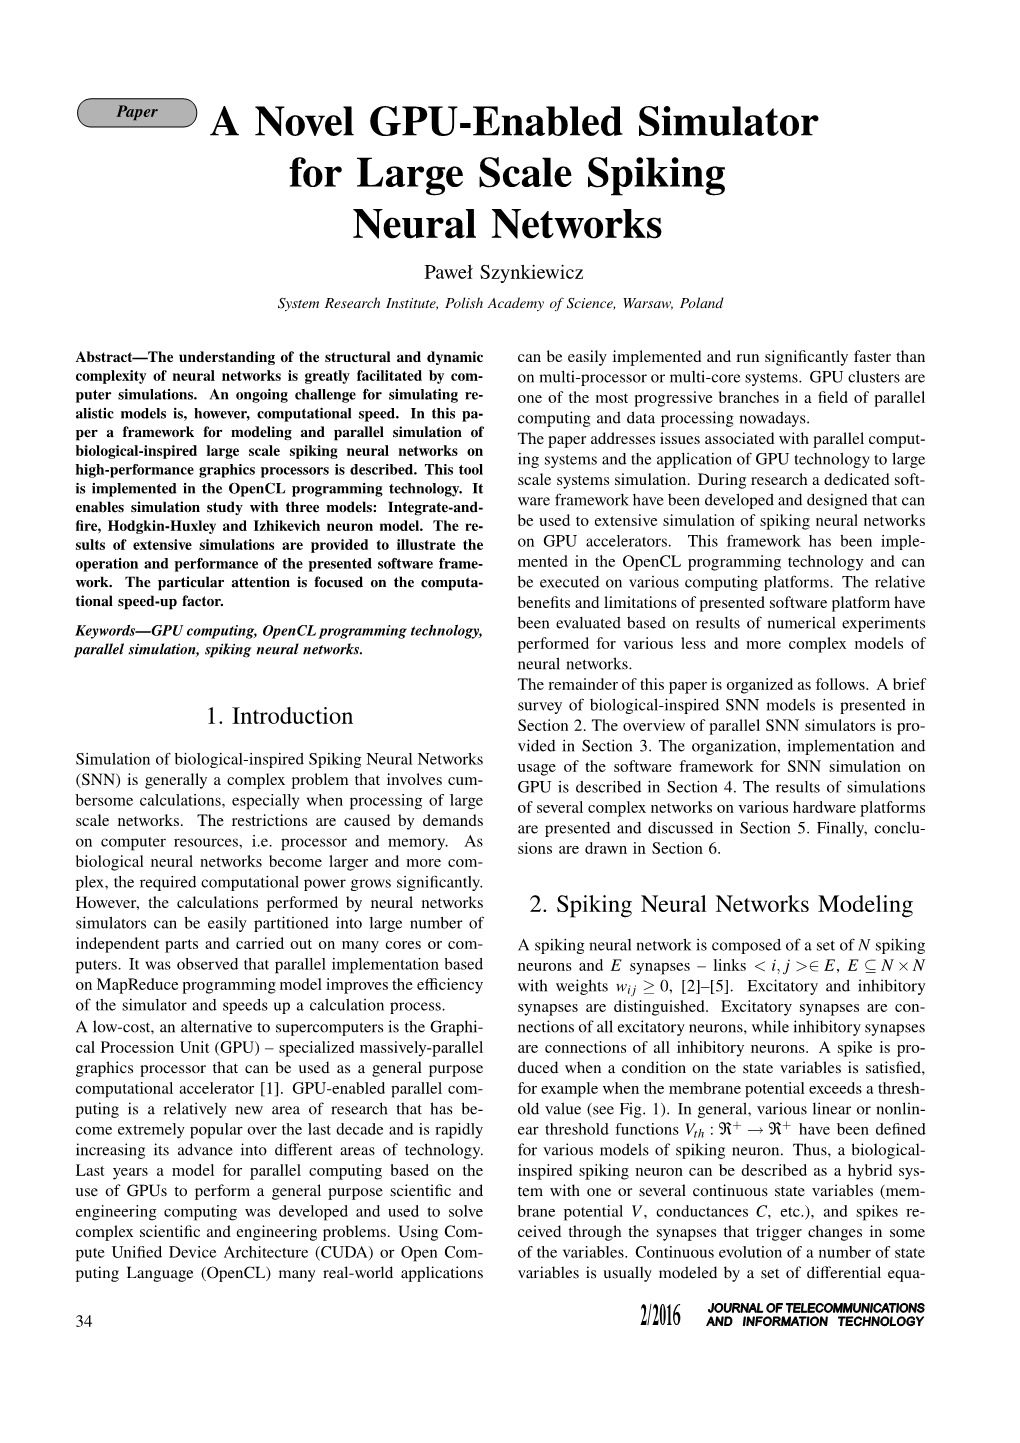 A Novel GPU-Enabled Simulator for Large Scale Spiking Neural Networks Paweł Szynkiewicz System Research Institute, Polish Academy of Science, Warsaw, Poland